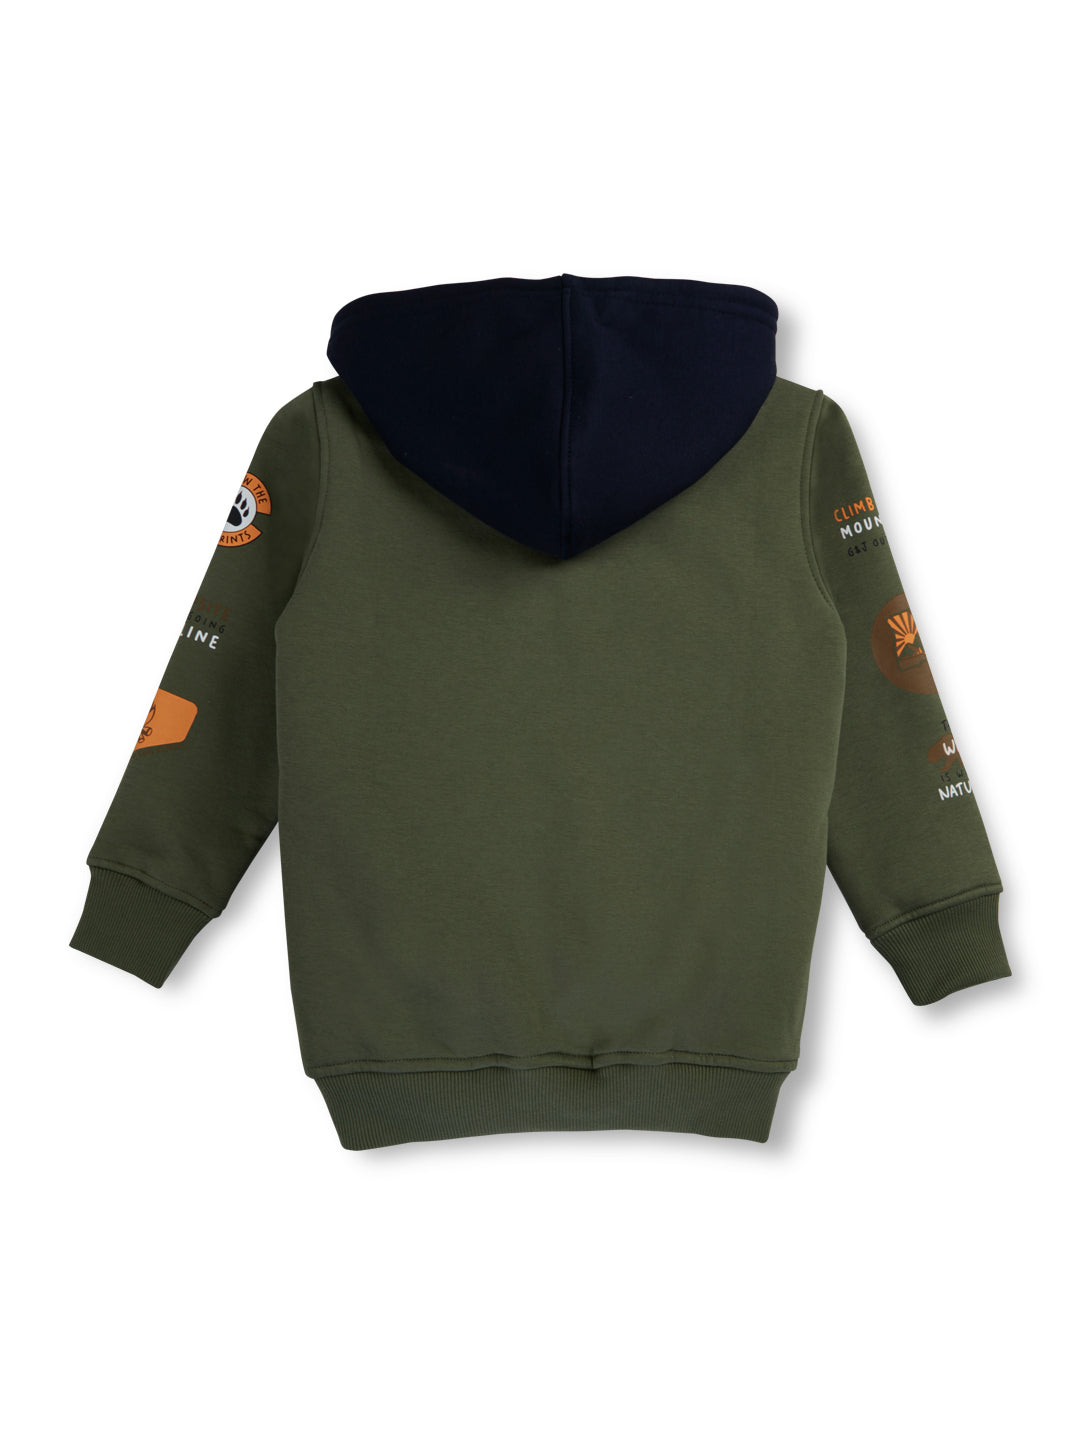 Boys Green Solid Cotton Knits Jacket Full Sleeves